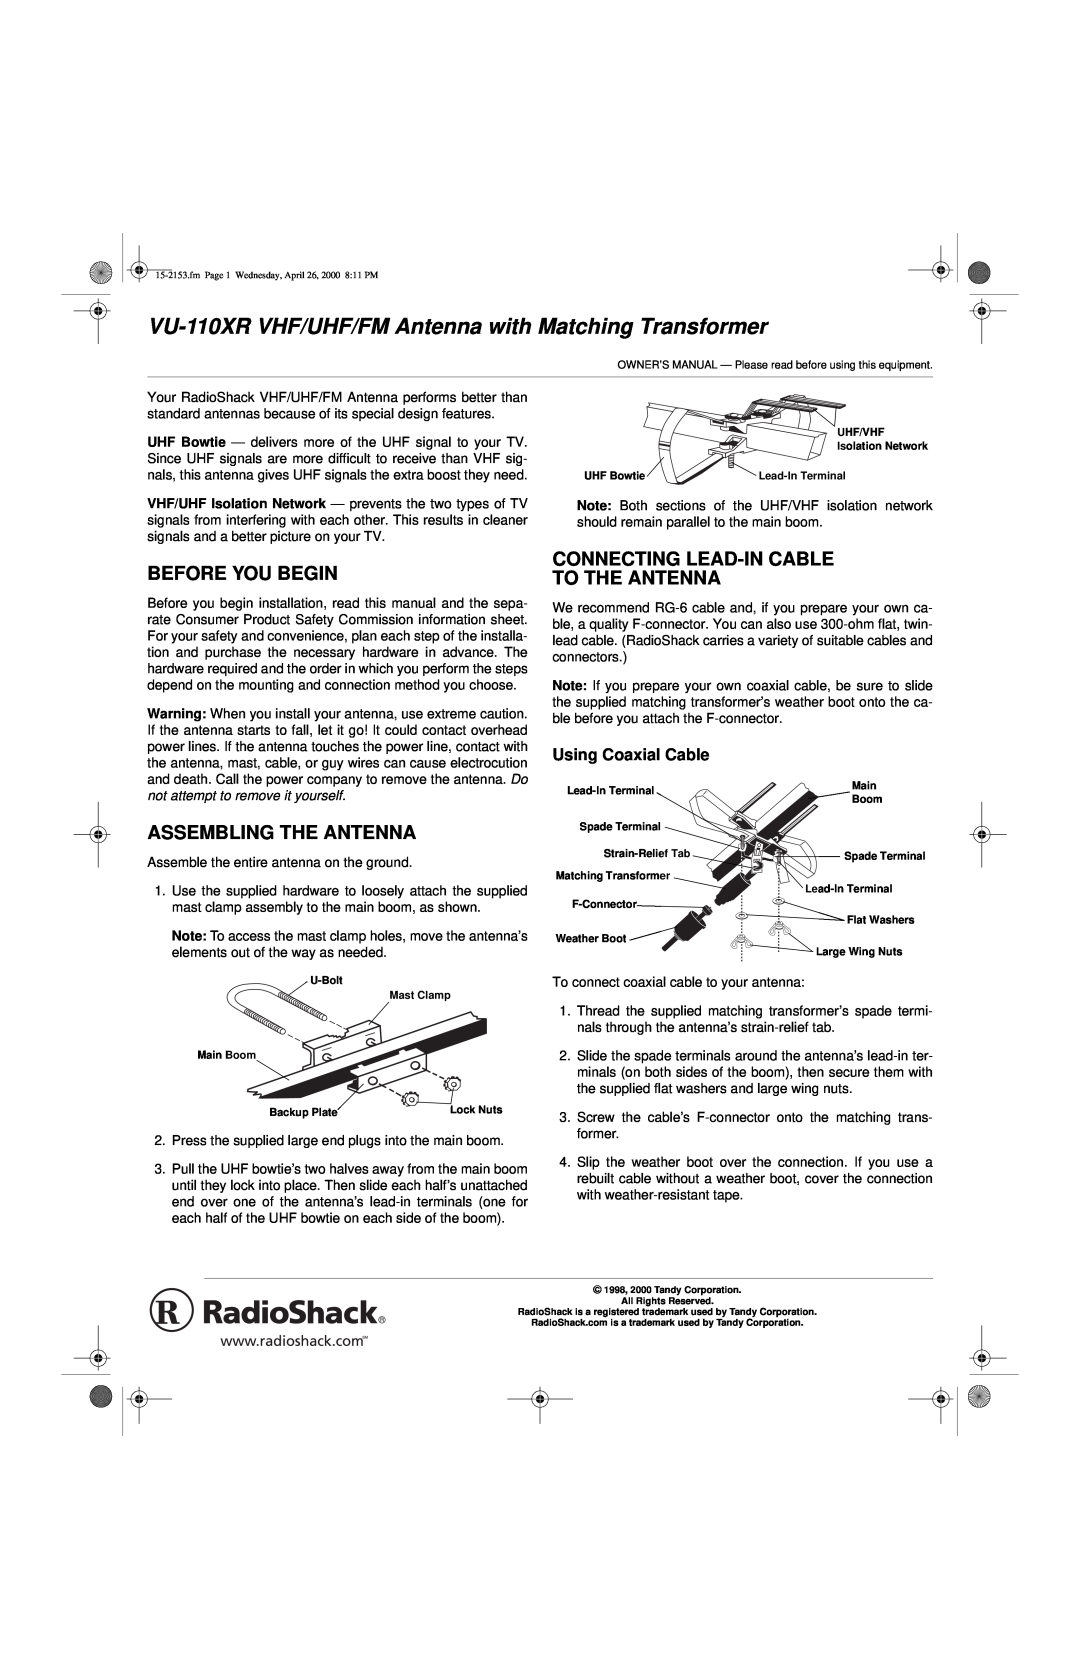 Radio Shack VU-110XR owner manual Before You Begin, Assembling The Antenna, Connecting Lead-In Cable To The Antenna 